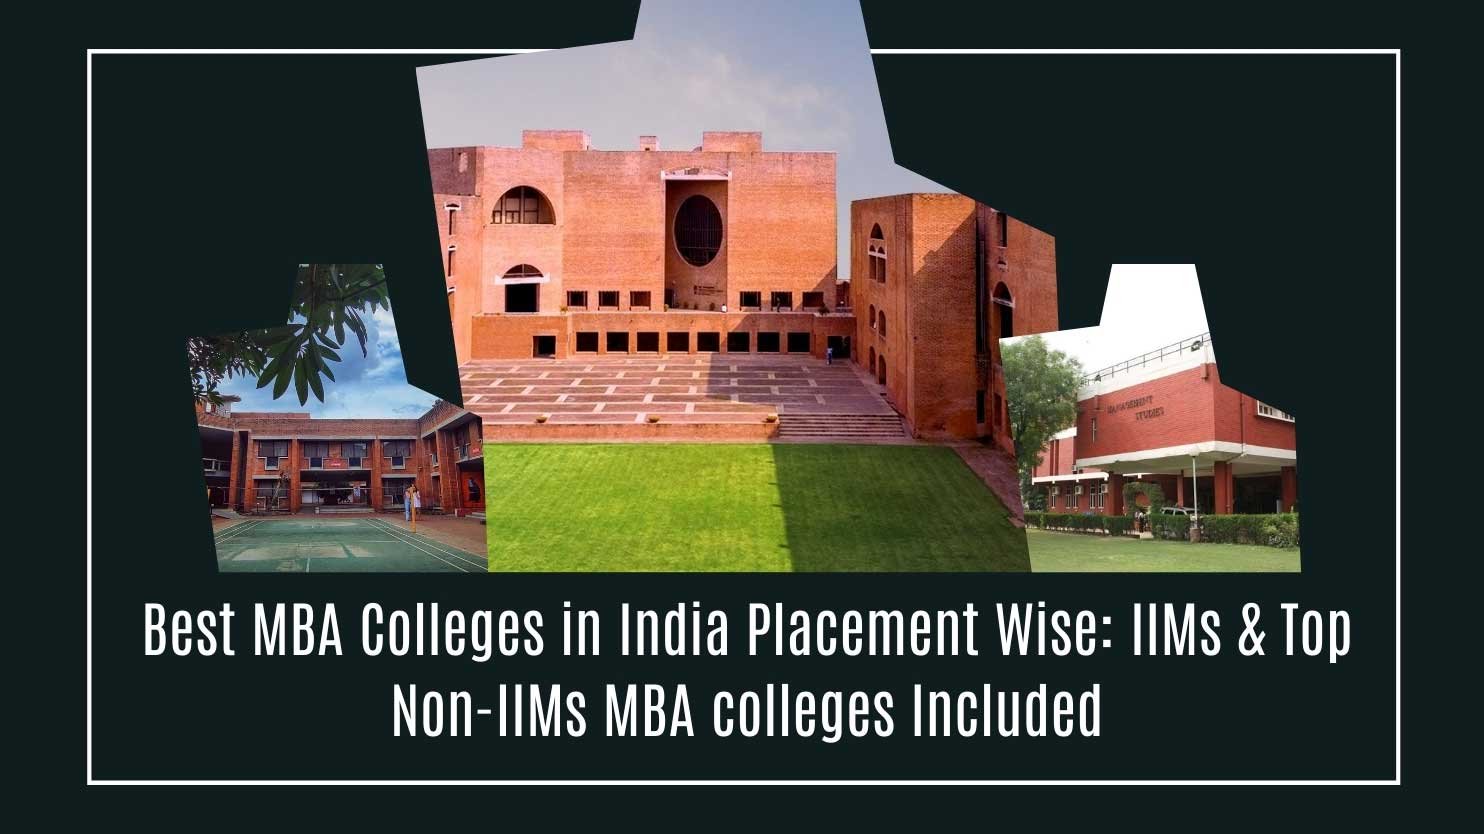 Best MBA Colleges in India Placement Wise: IIMs & Top Non-IIMs MBA colleges Included